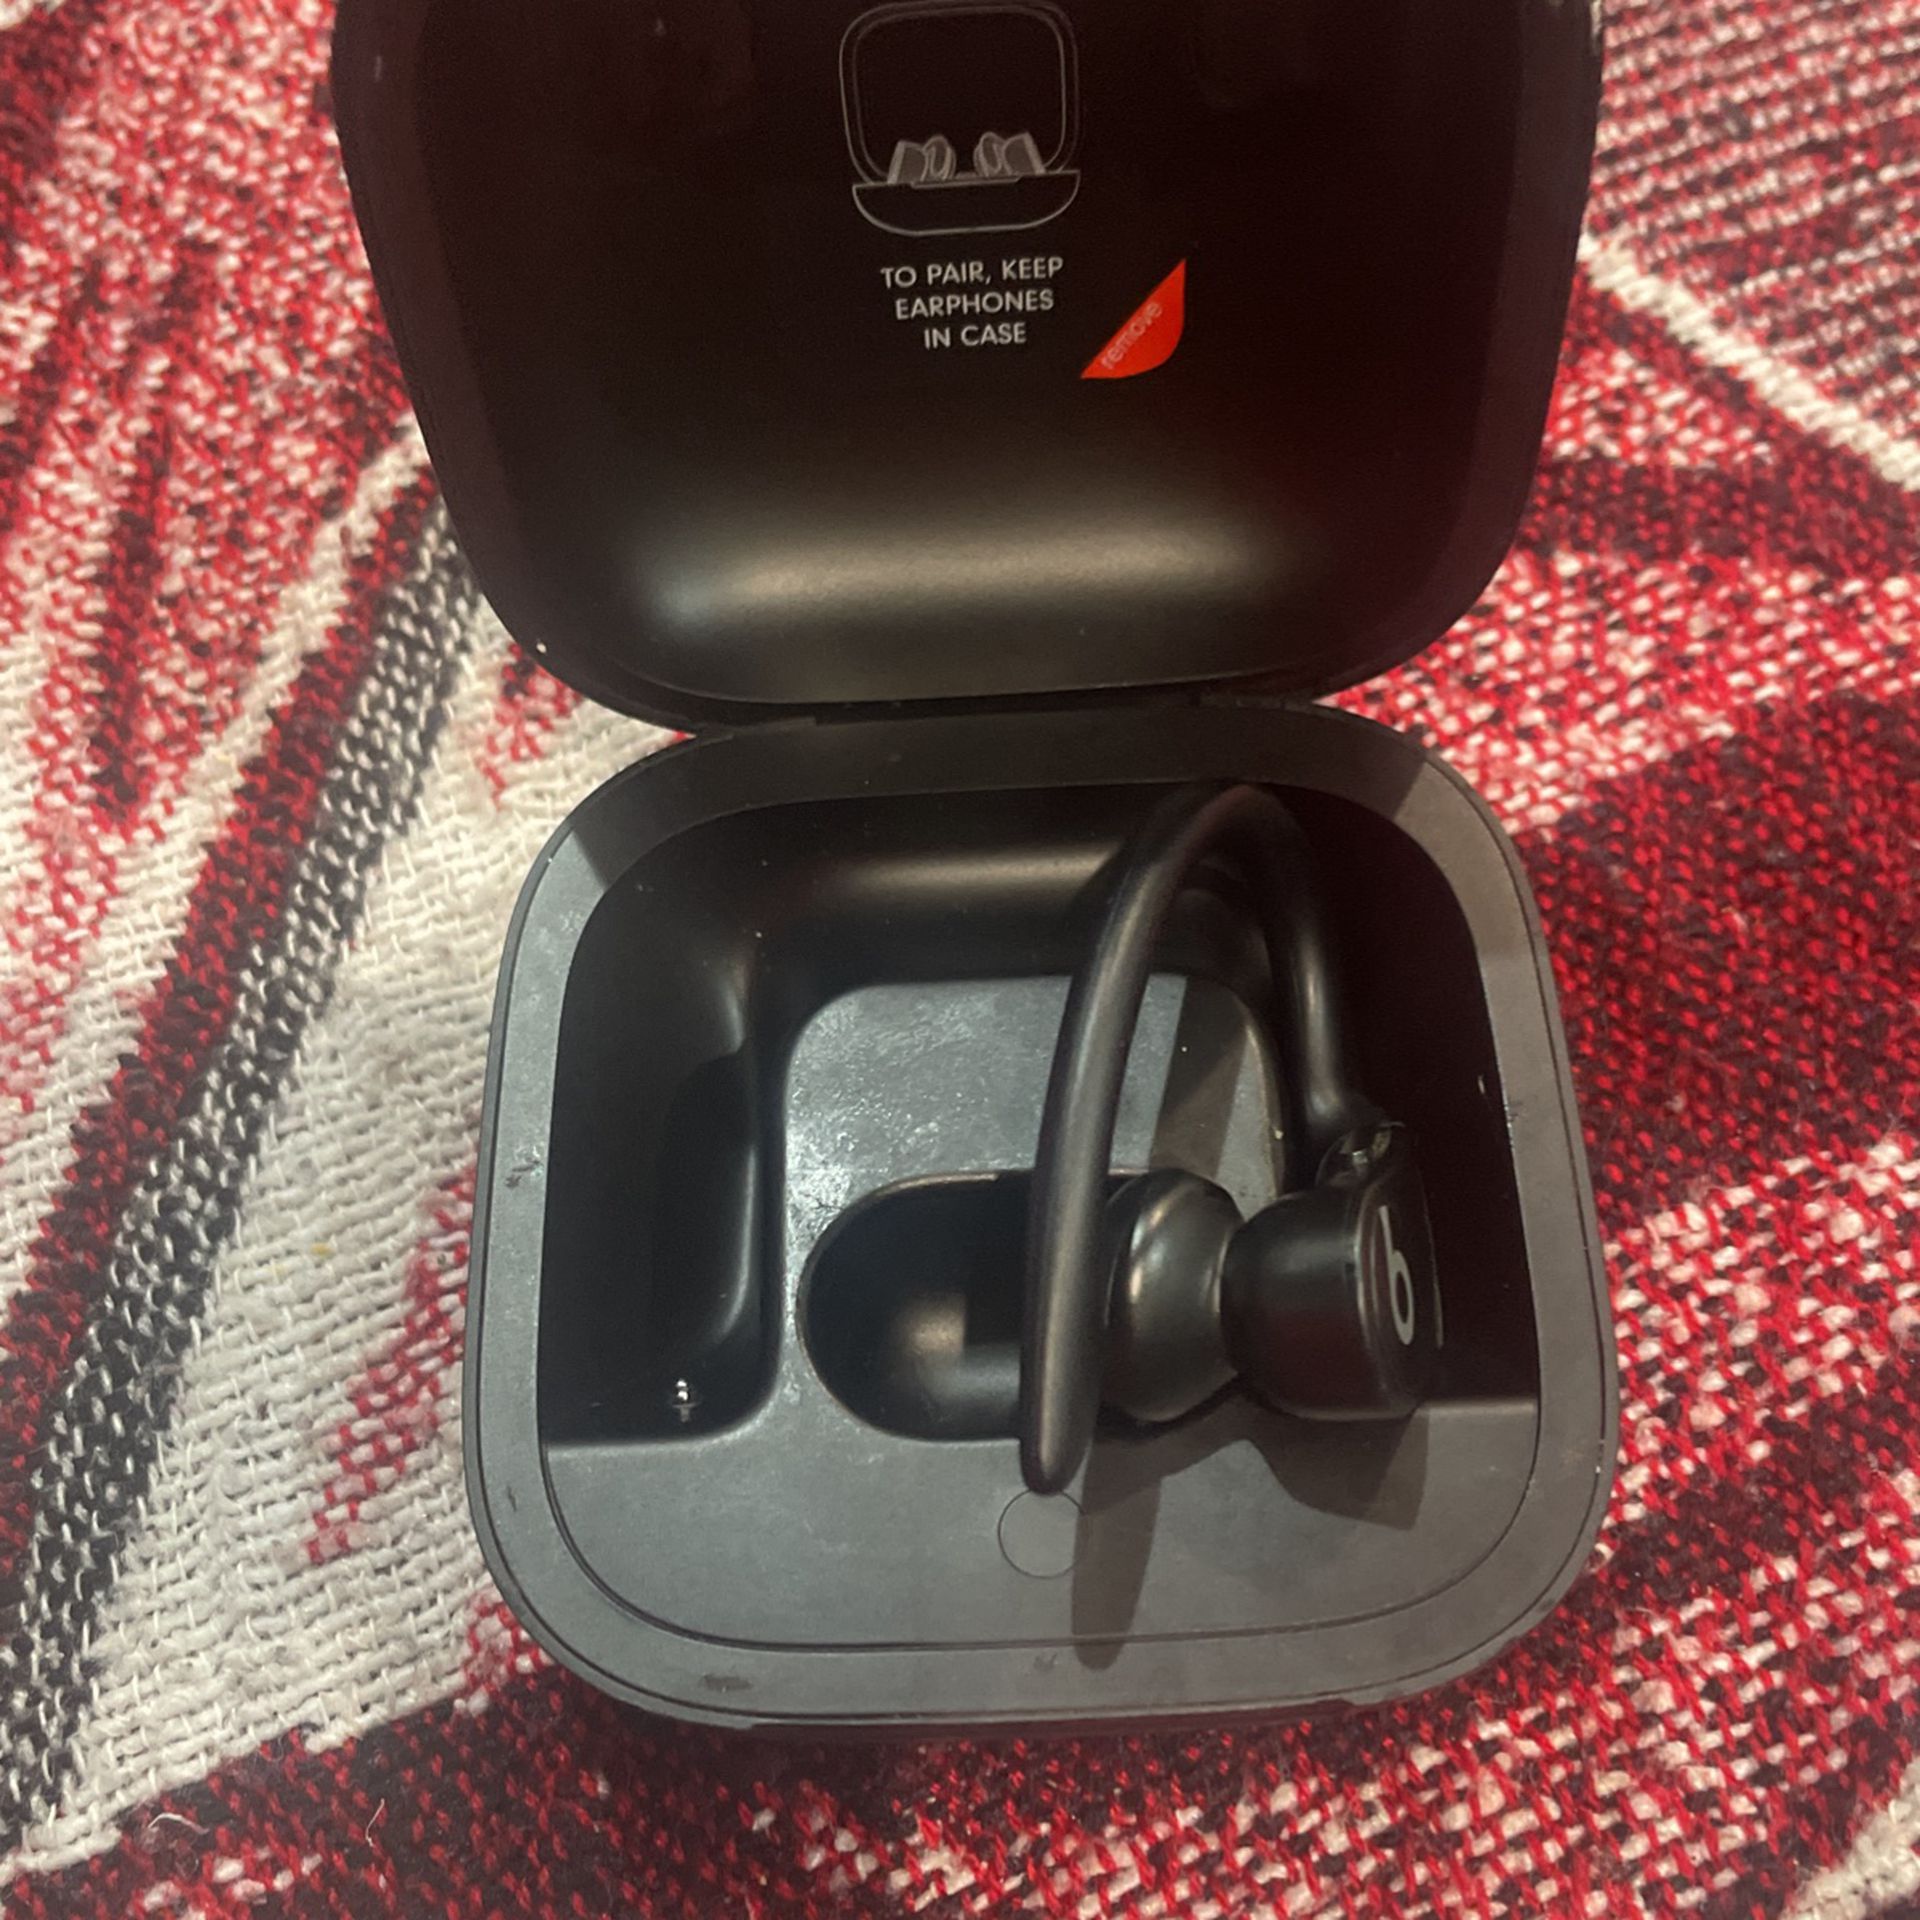 Power Beats Pro - Right Side Headphone With Case